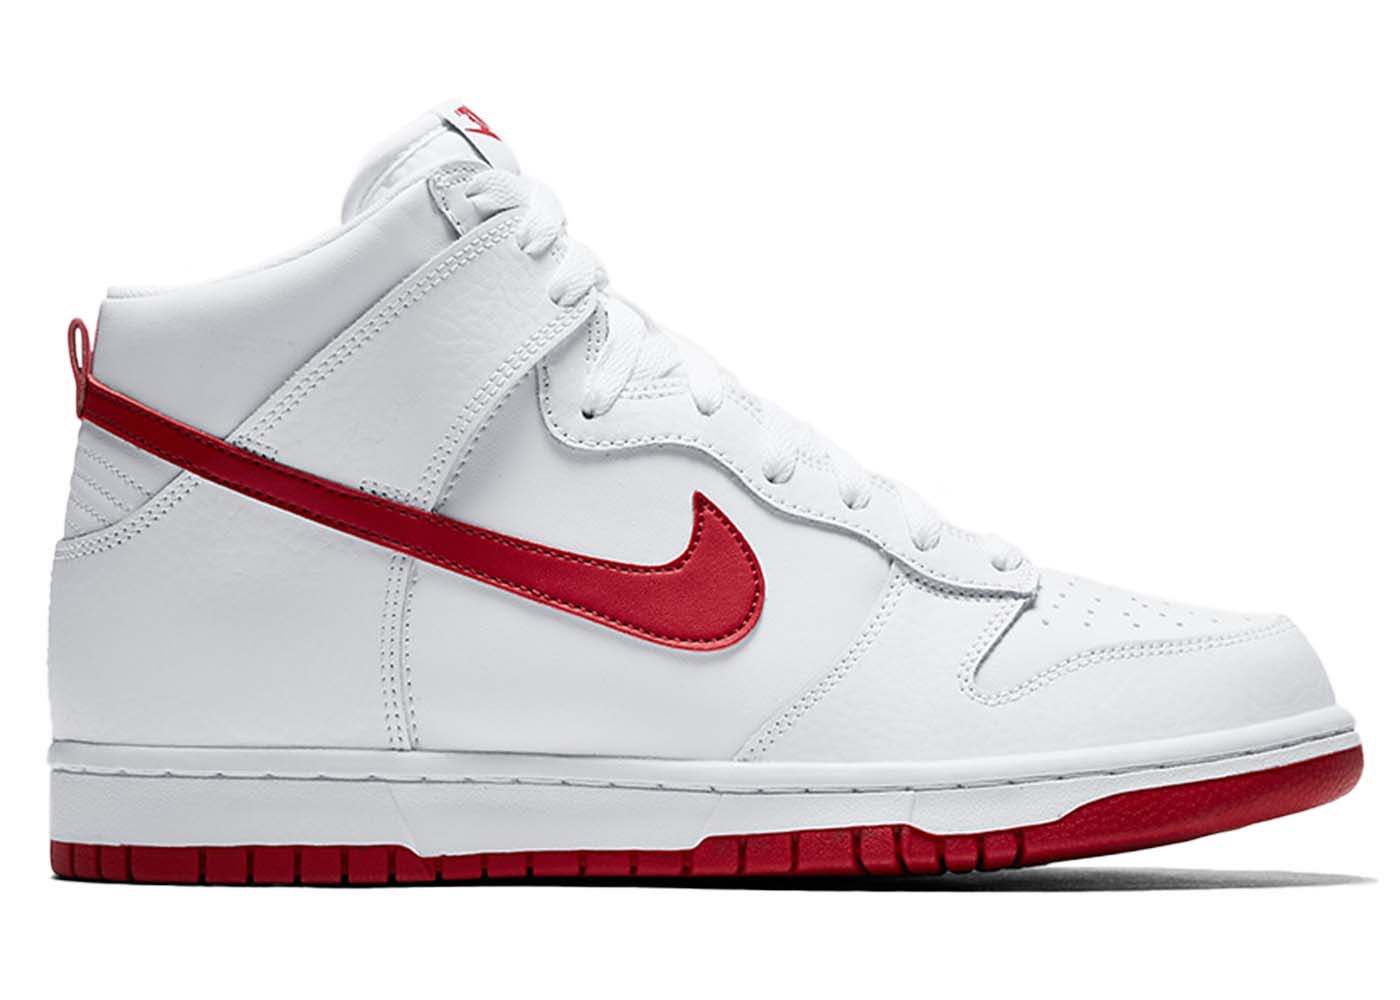 NIKE DUNK HIGH White and Red  26.5